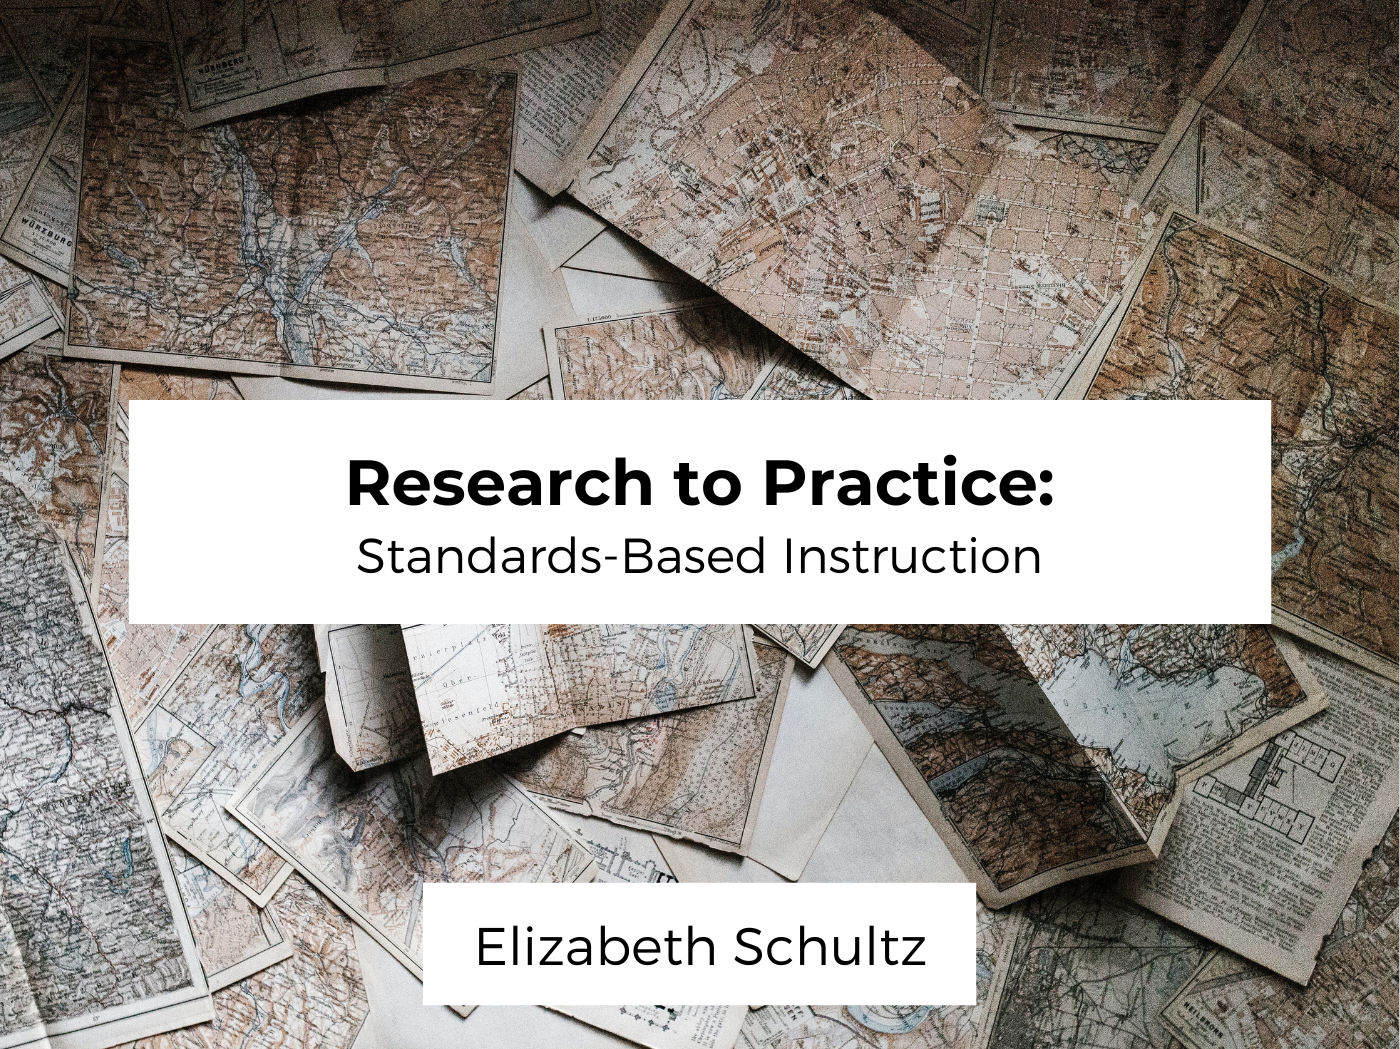 Image of folded unidentifiable maps on a table behind two white boxes that are centered. The first white box has the title of the post; Research to Practice: Standards-Based Instruction. The lower white box has the author name, Elizabeth Schultz.